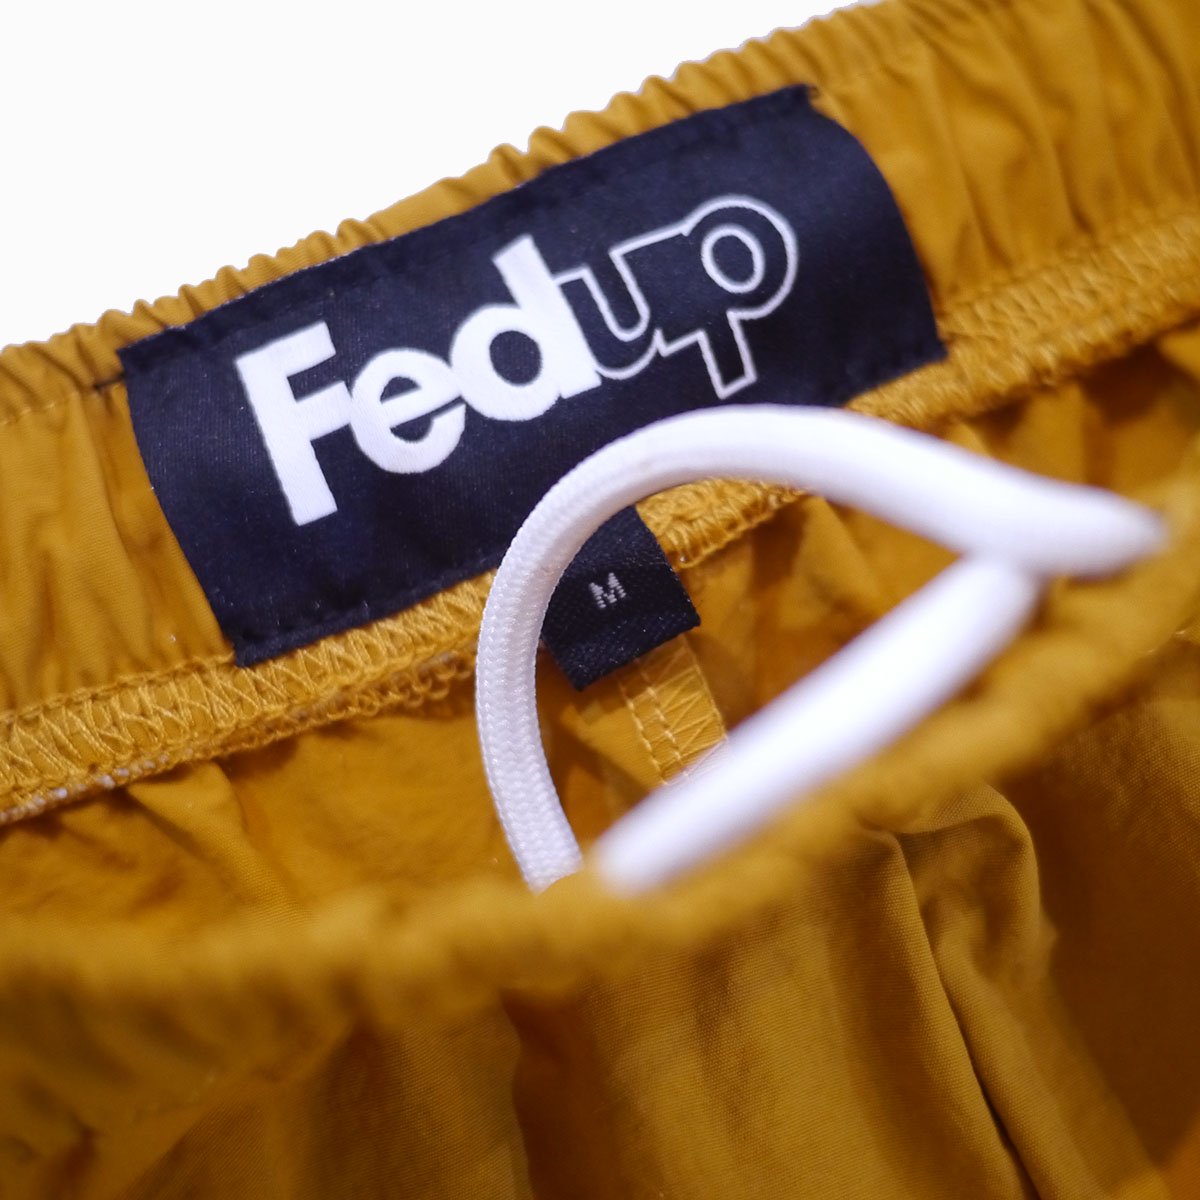 Fedup | HIPHOP WEAR | <img class='new_mark_img1' src='https://img.shop-pro.jp/img/new/icons30.gif' style='border:none;display:inline;margin:0px;padding:0px;width:auto;' />Fedup 